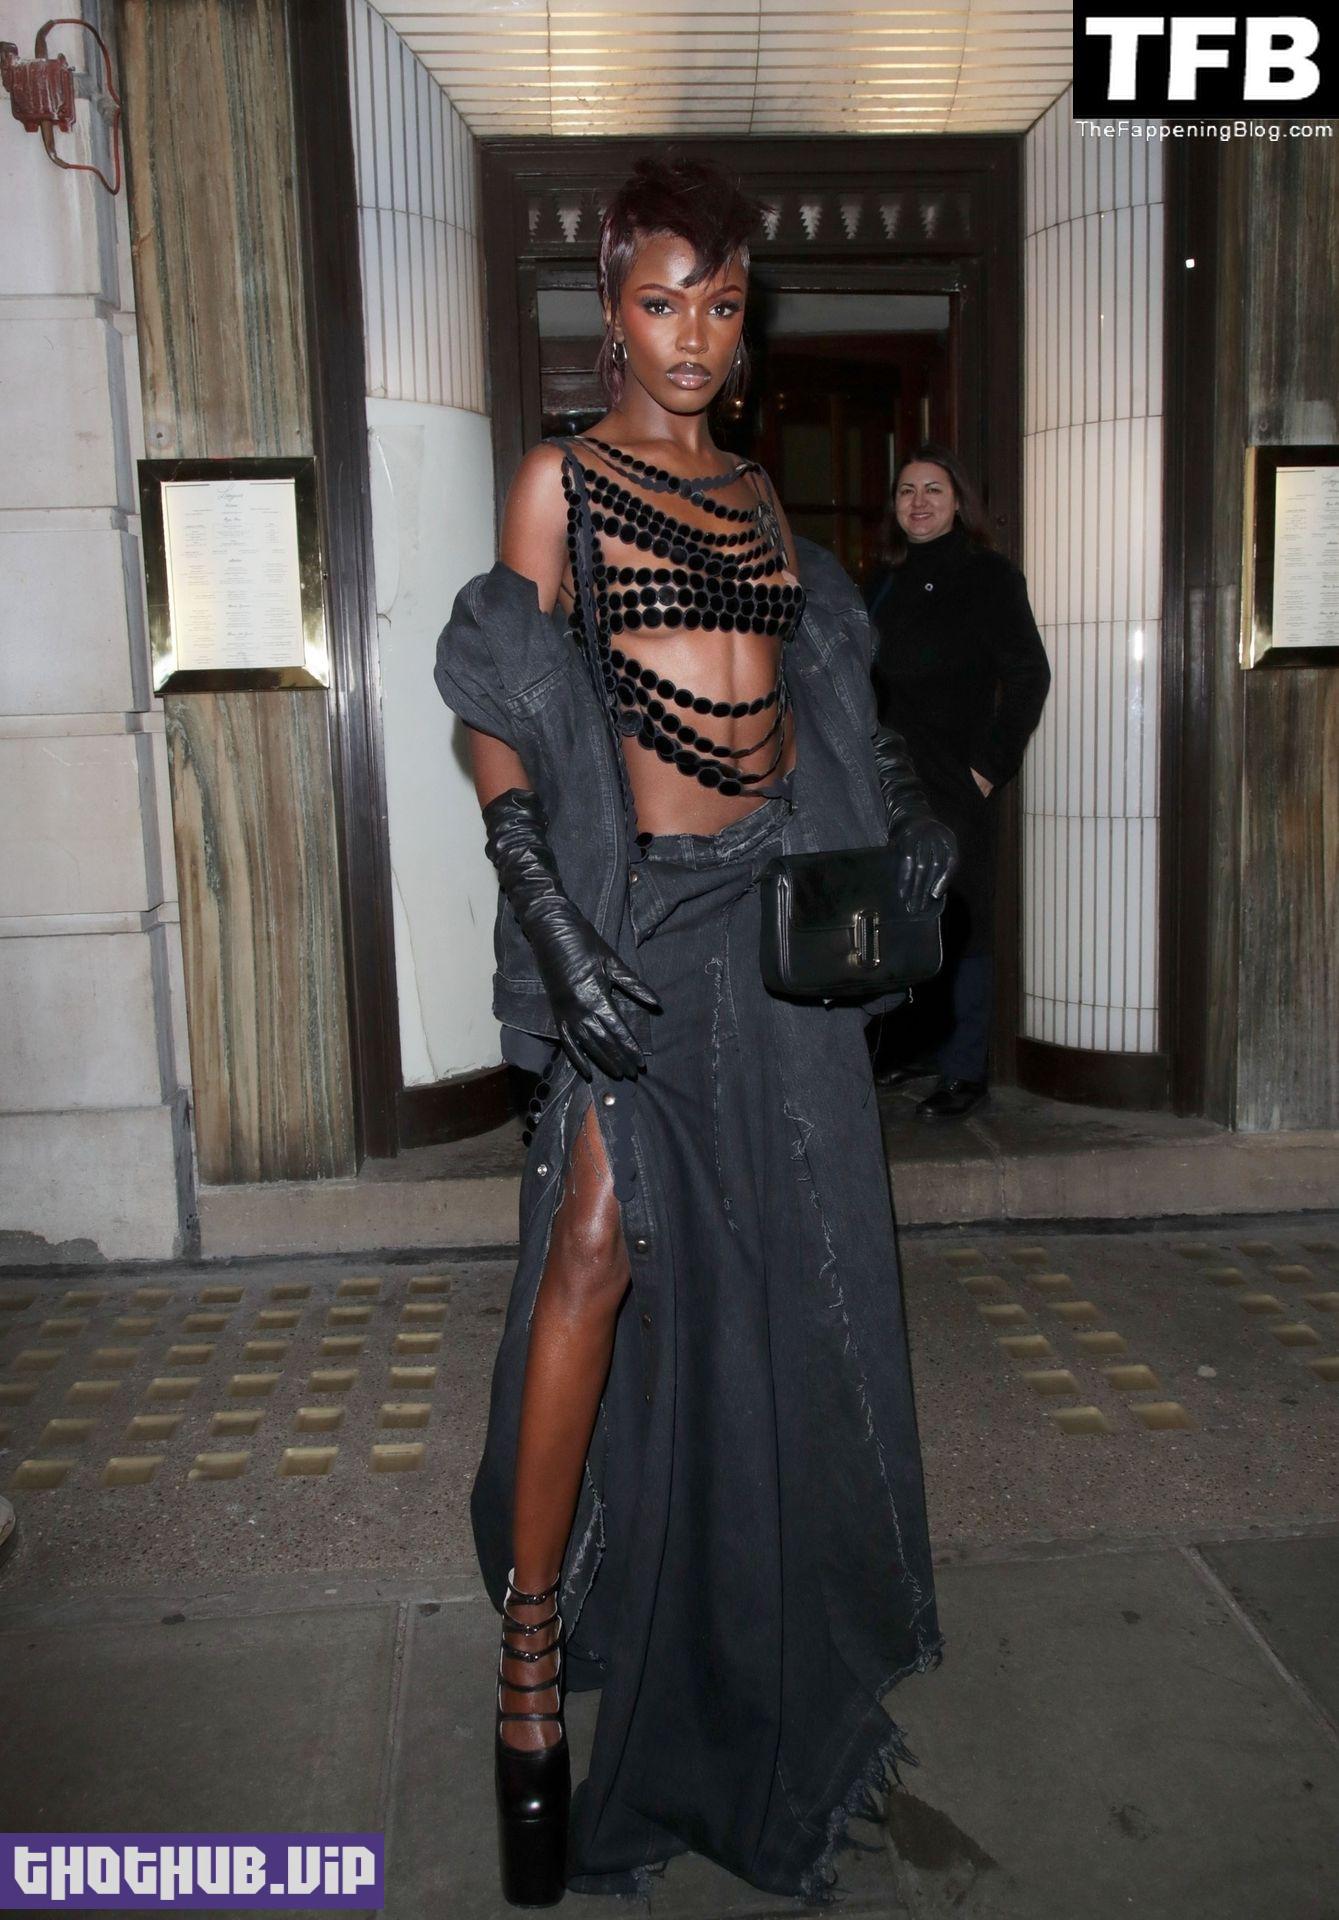 Leomie Anderson Sexy The Fappening Blog 16